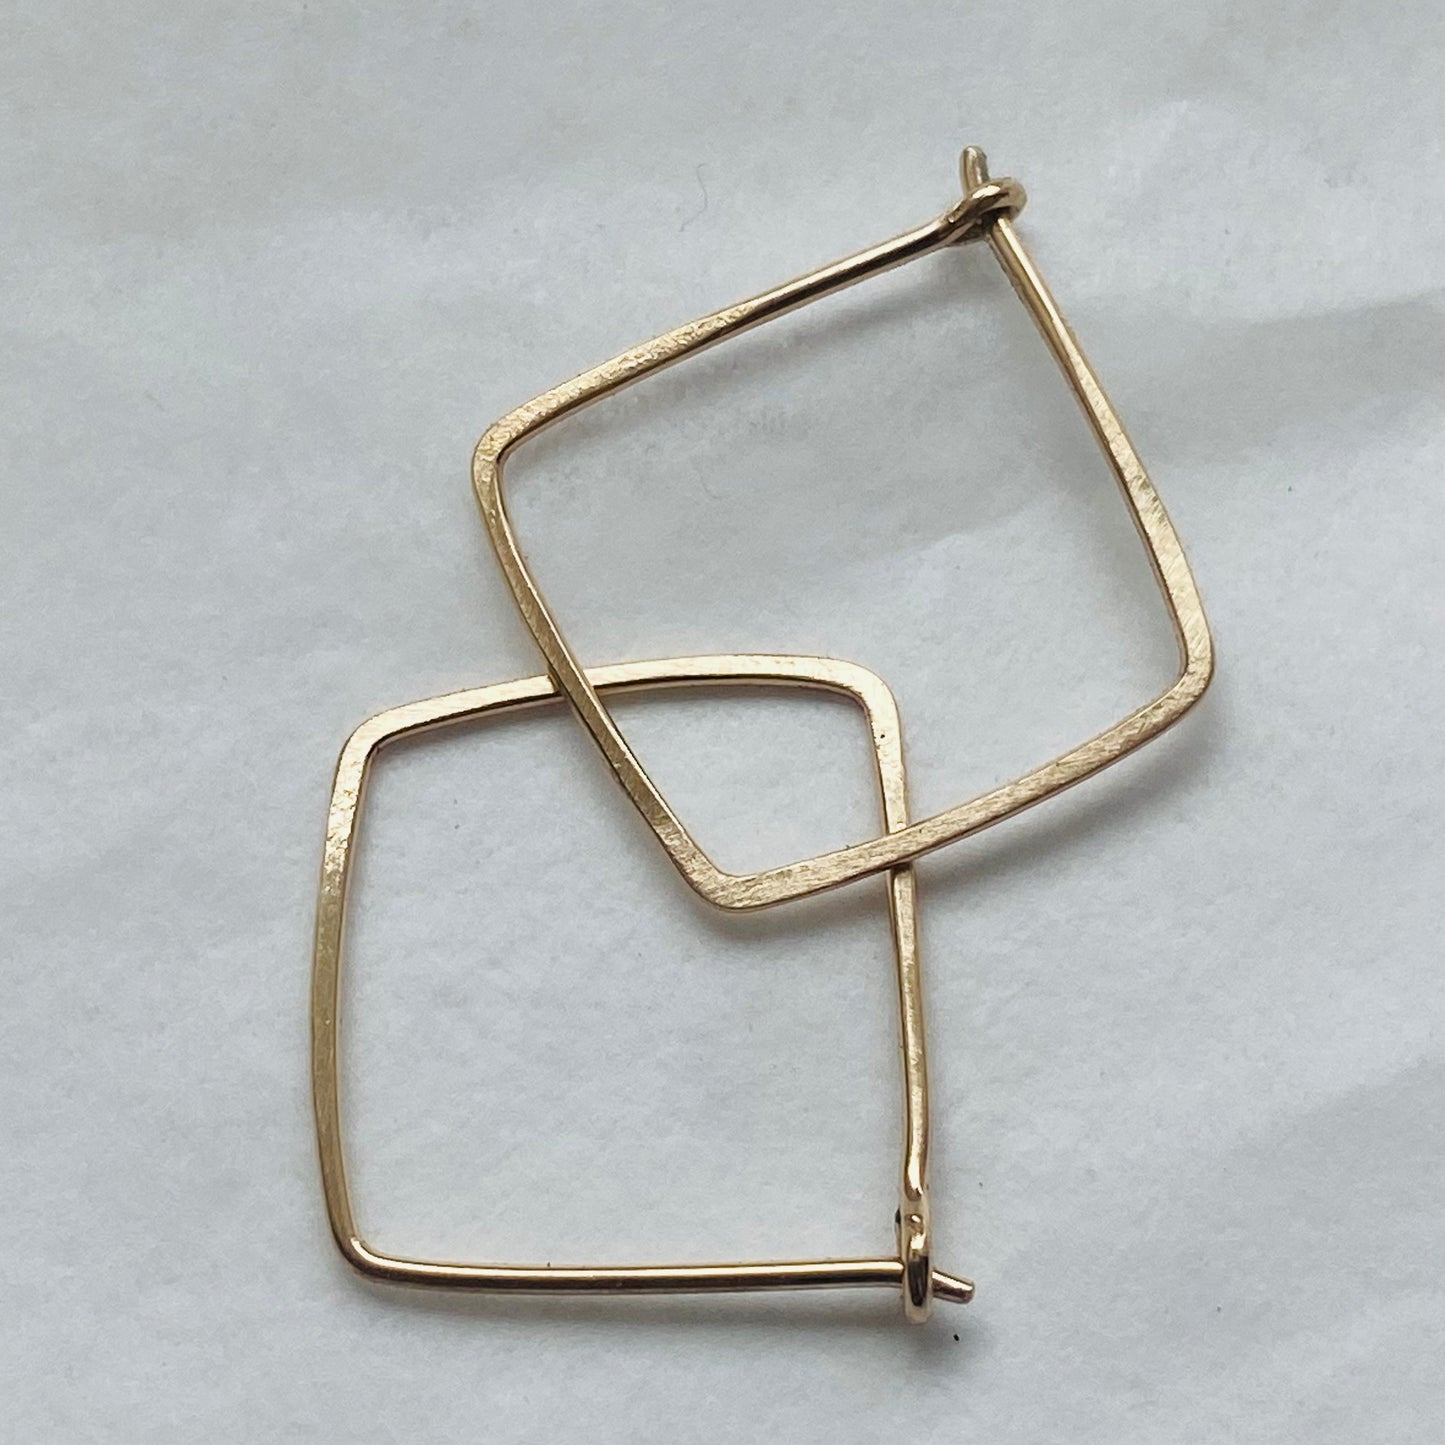 The Square Hoops